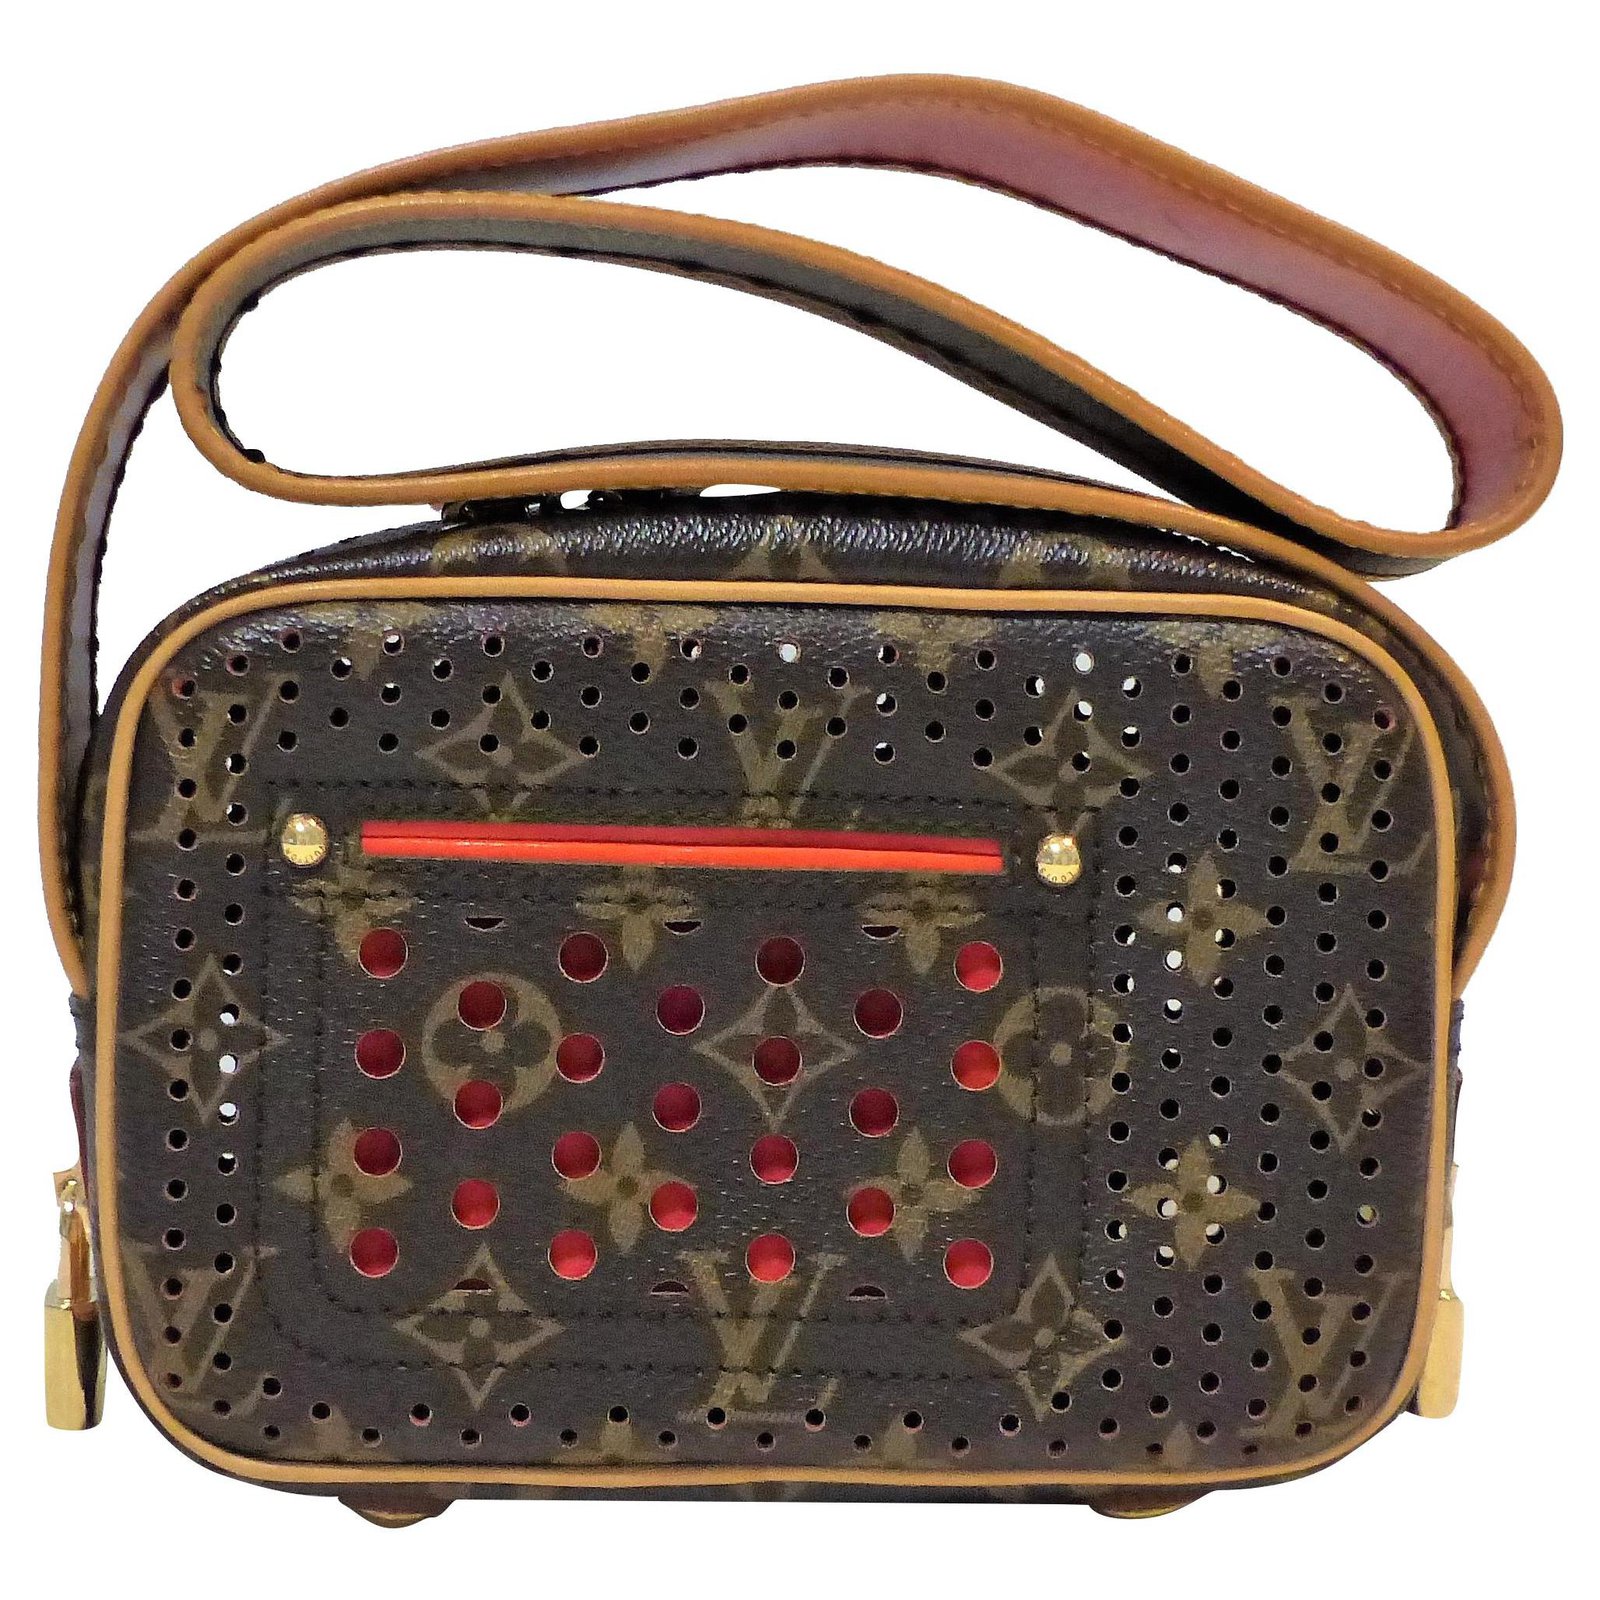 Louis Vuitton Limited Edition Monogram Perforated Trocadero Bag